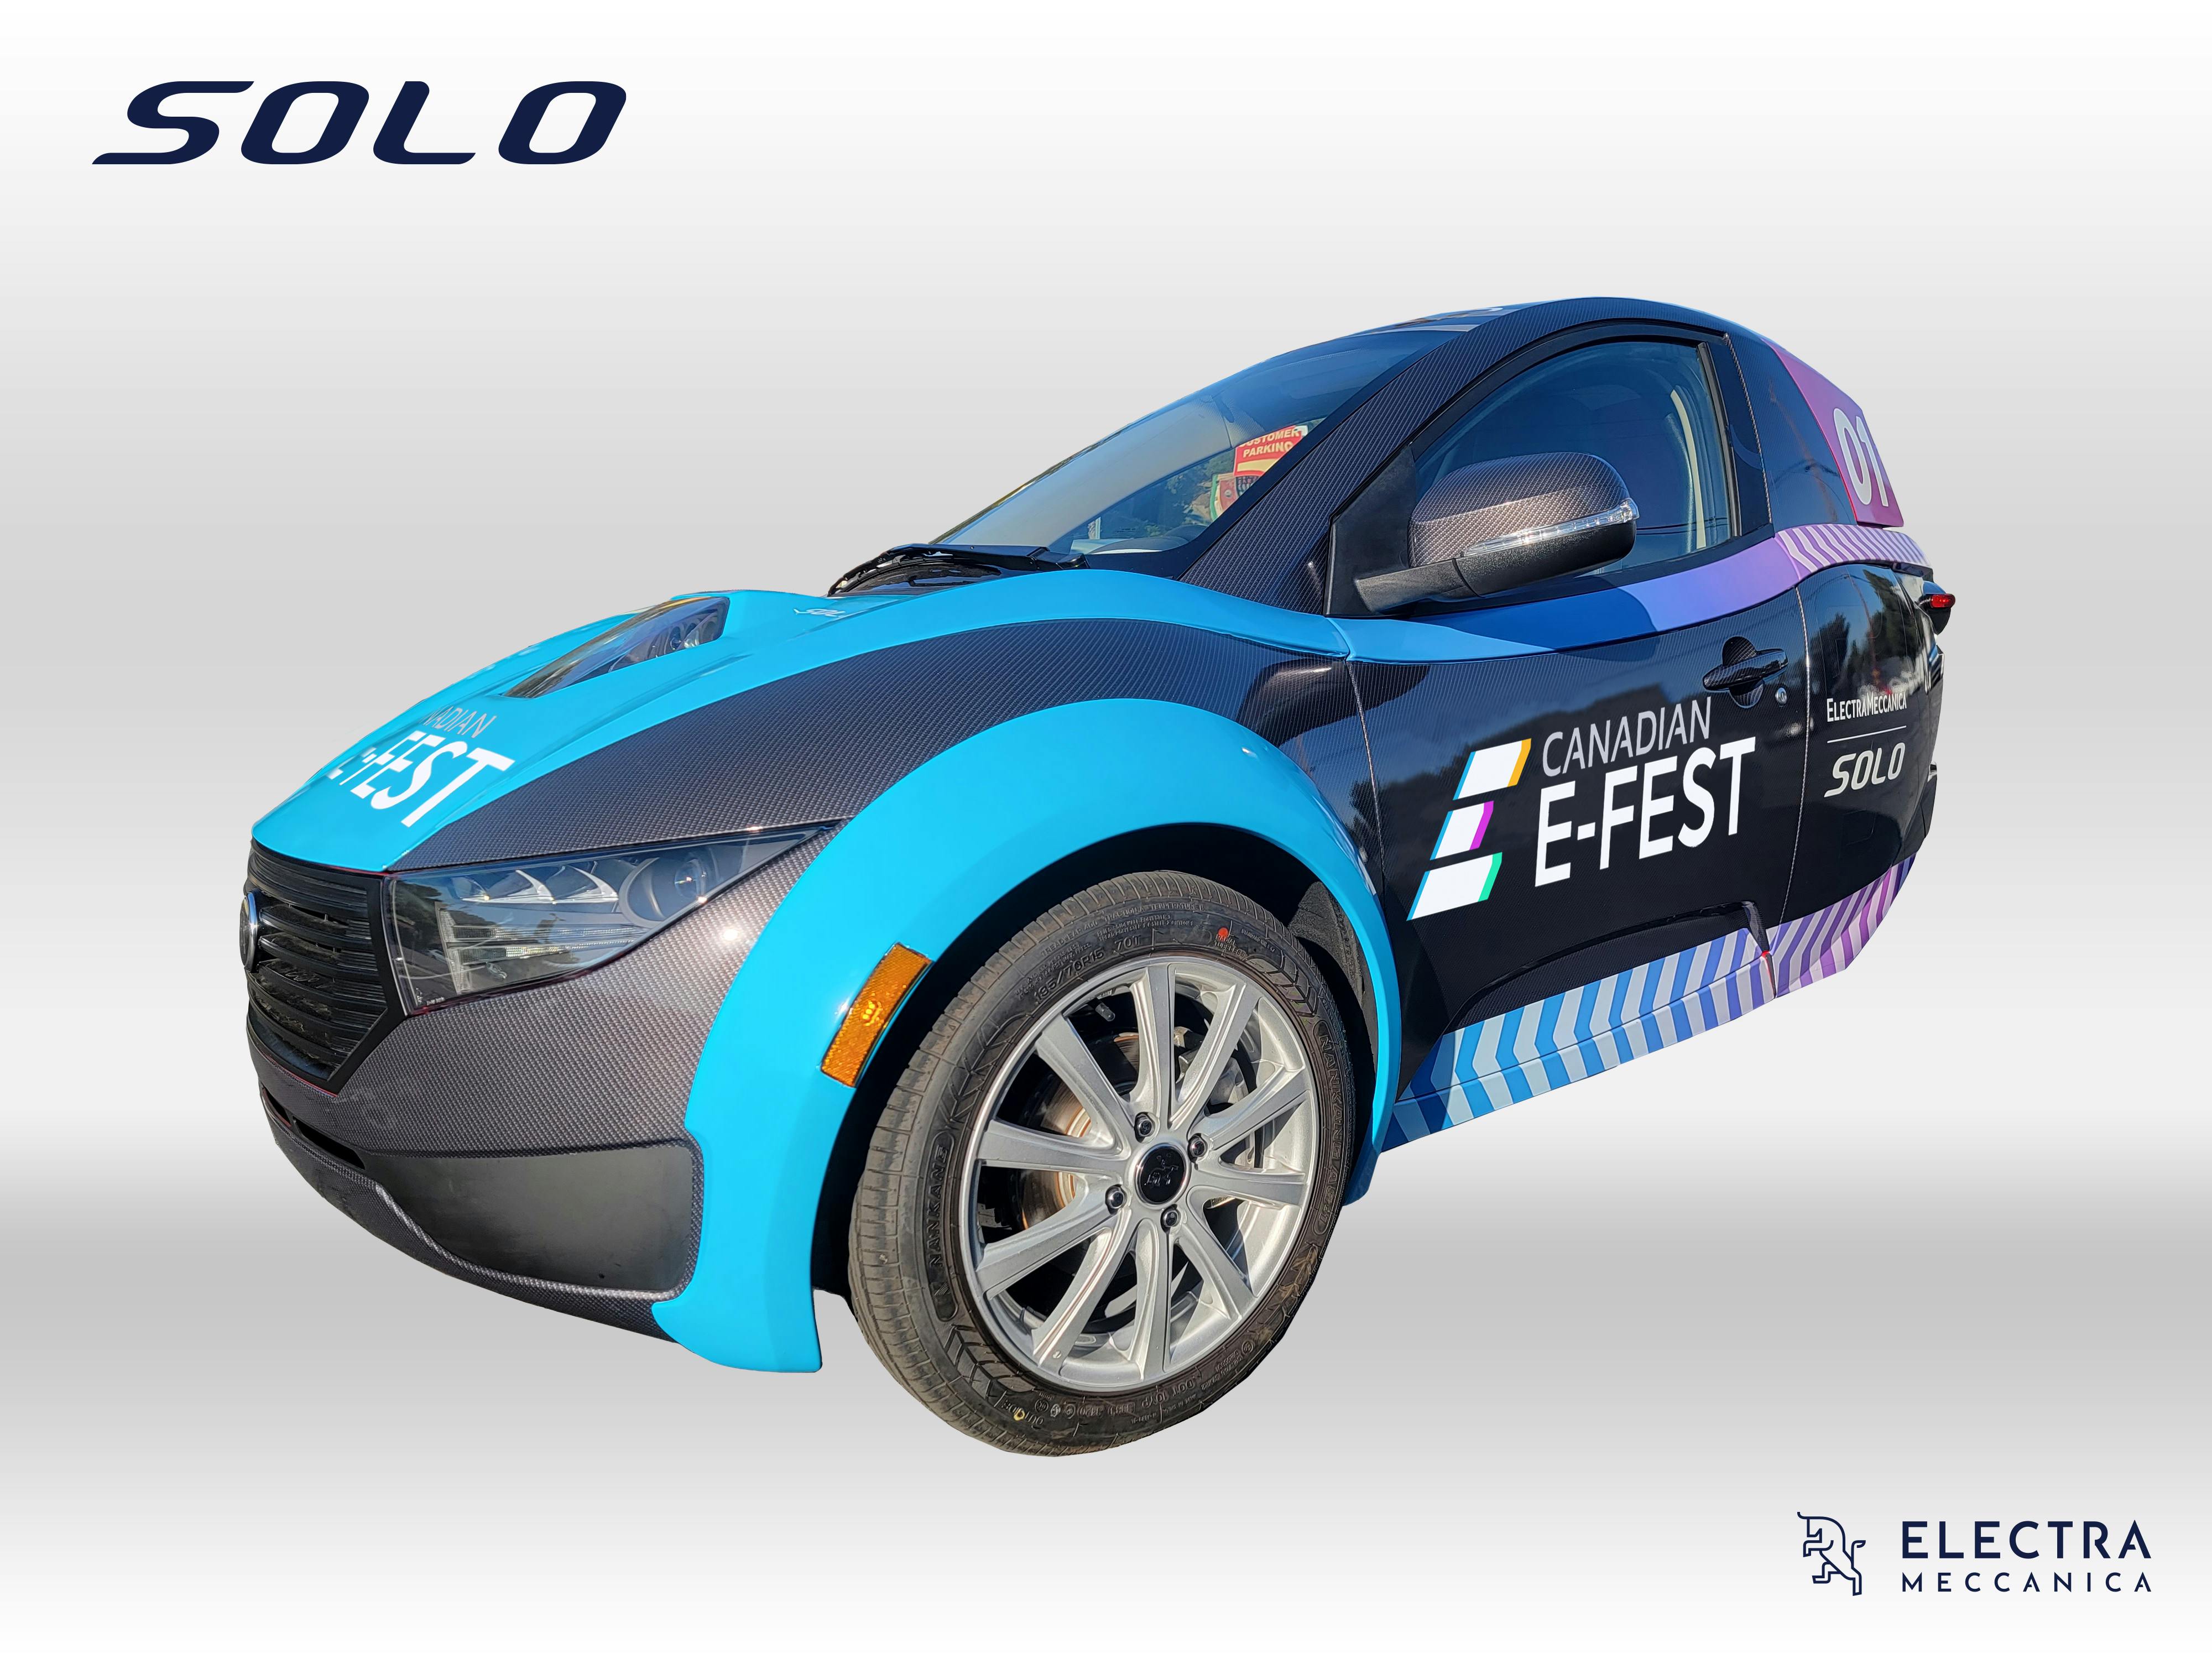 ElectraMeccanica’s SOLO EV Selected as Exclusive Vehicle for Celebrity Race during Canadian E-Fest